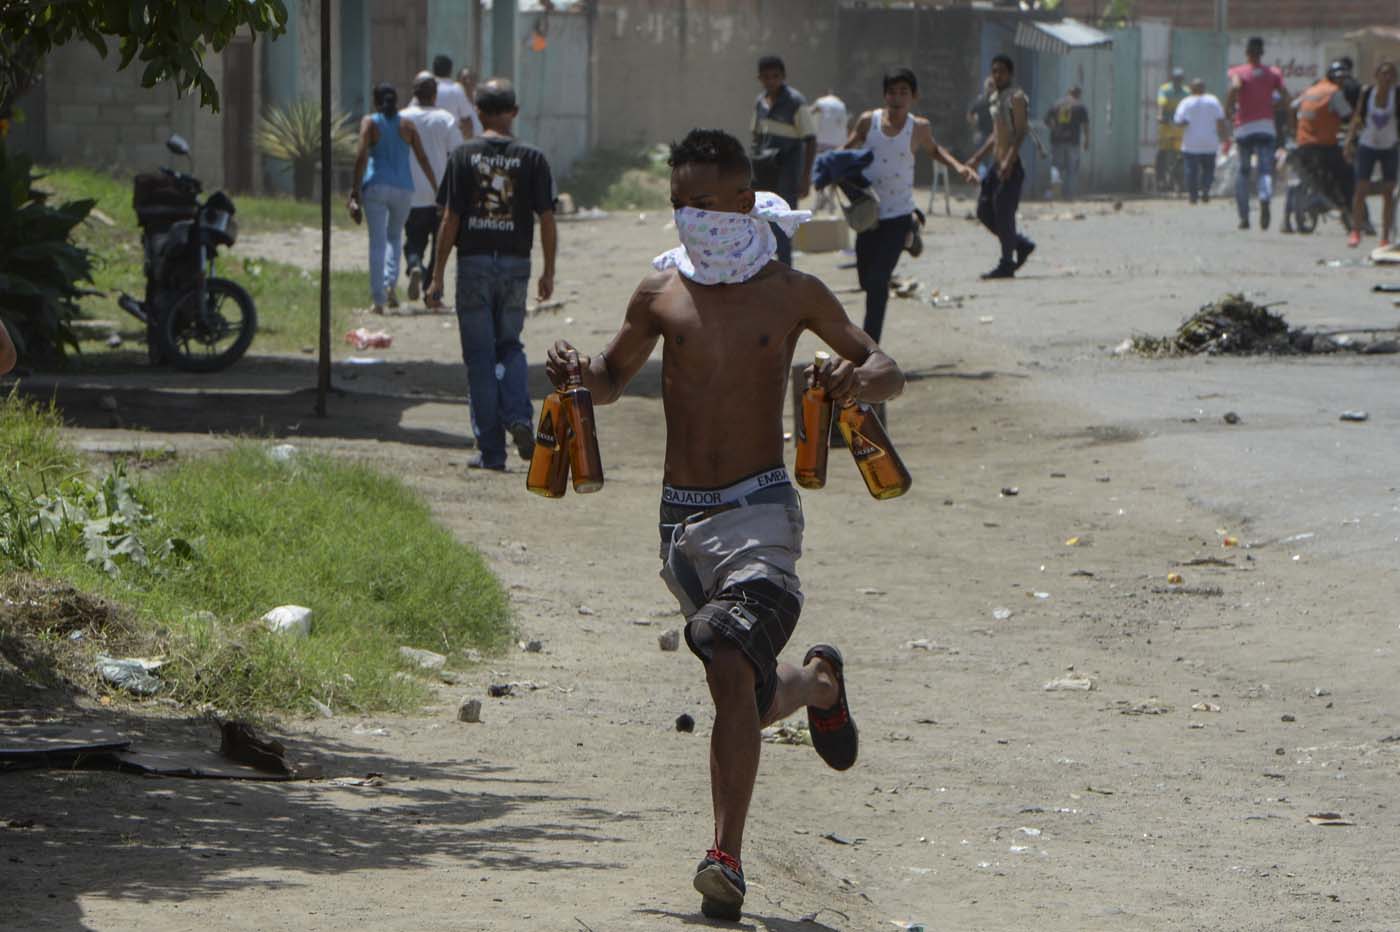 A young man runs carryng stolen alcohol bottles after looting a supermarket in Maracay, Aragua state, Venezuela on June 27, 2017. / AFP PHOTO / Federico Parra